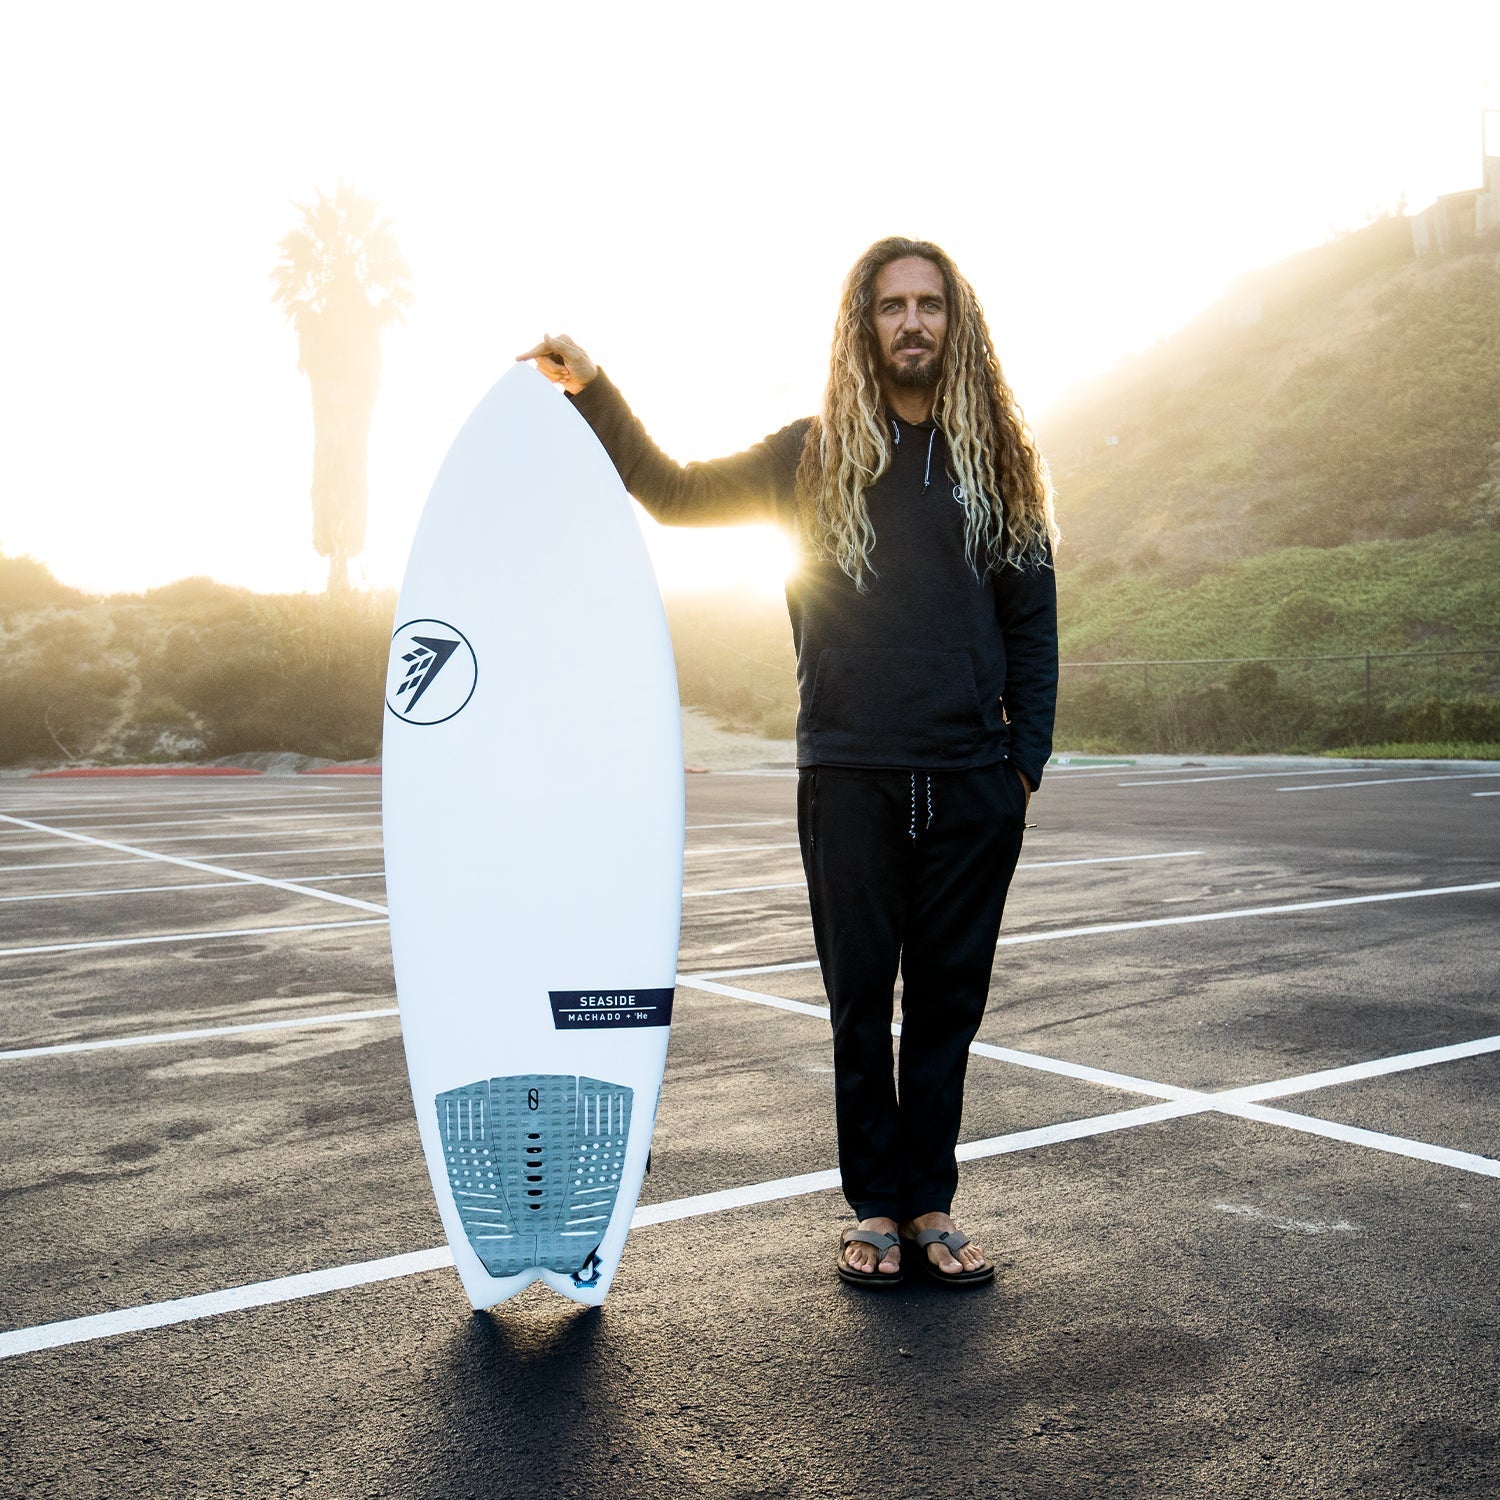 Firewire Surfboards USA | The future under your feet.